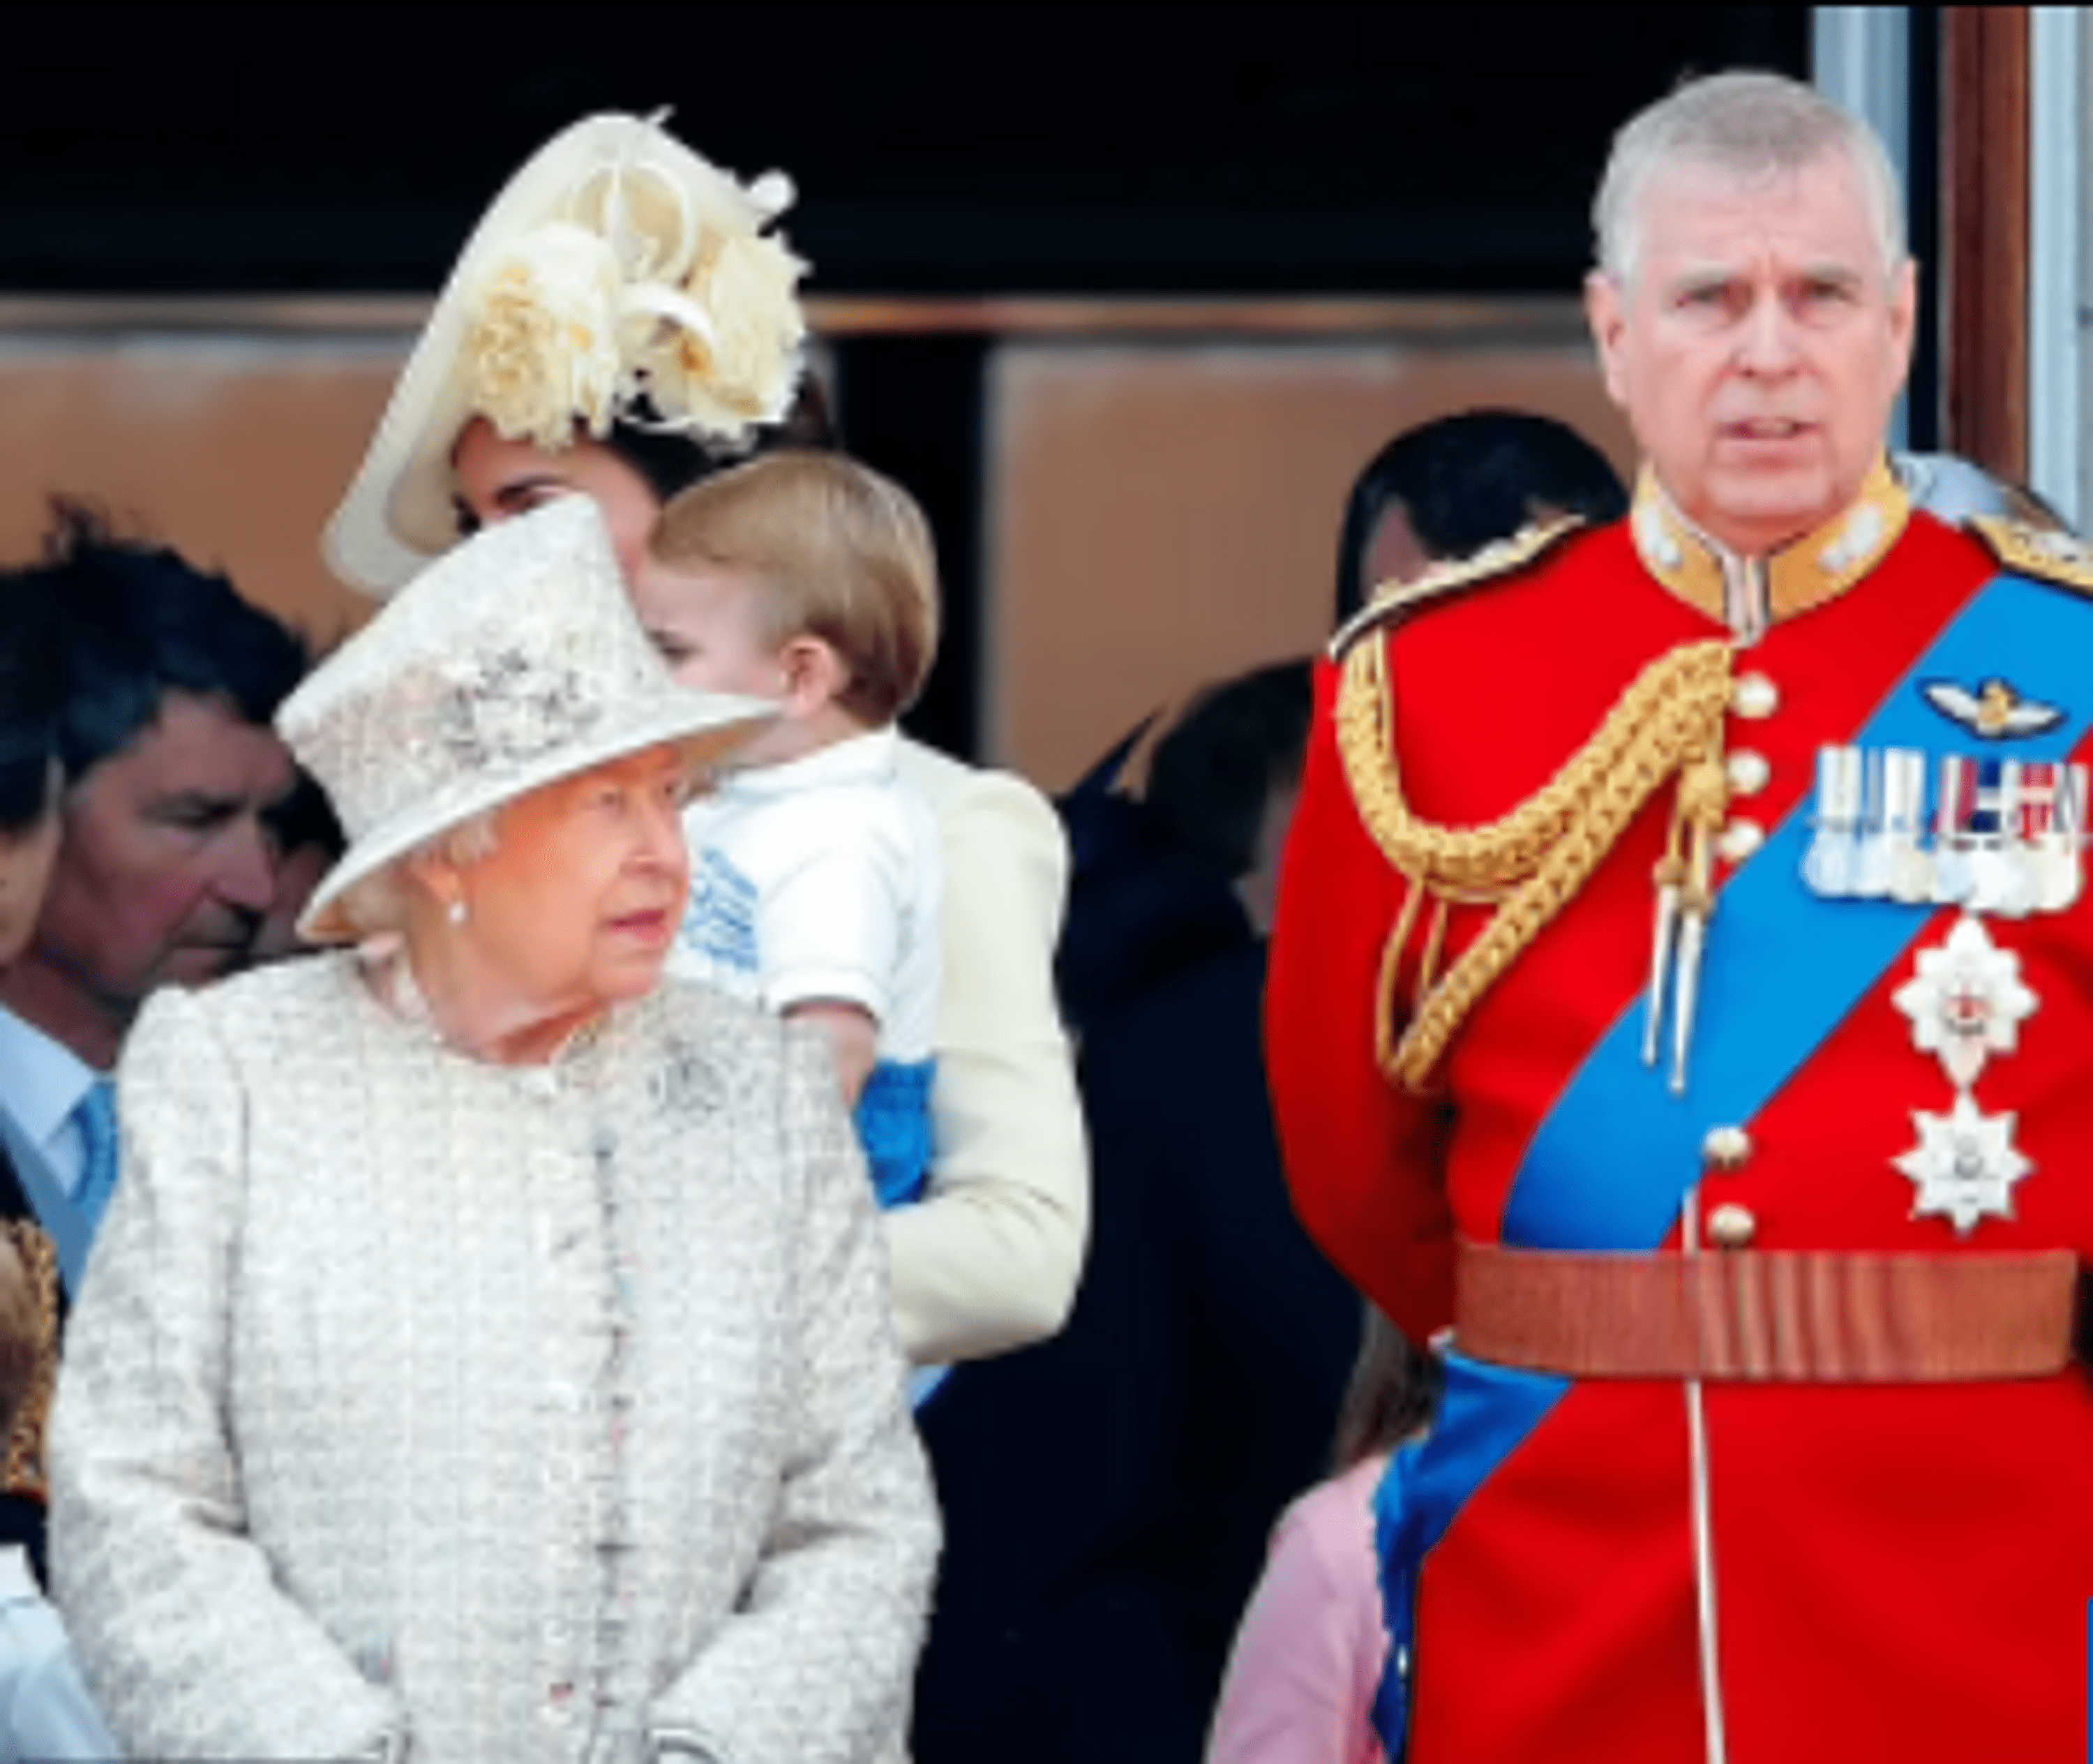 the-scandalous-prince-andrew-will-appear-at-the-presentation-of-the-highest-knightly-order-of-great-britain